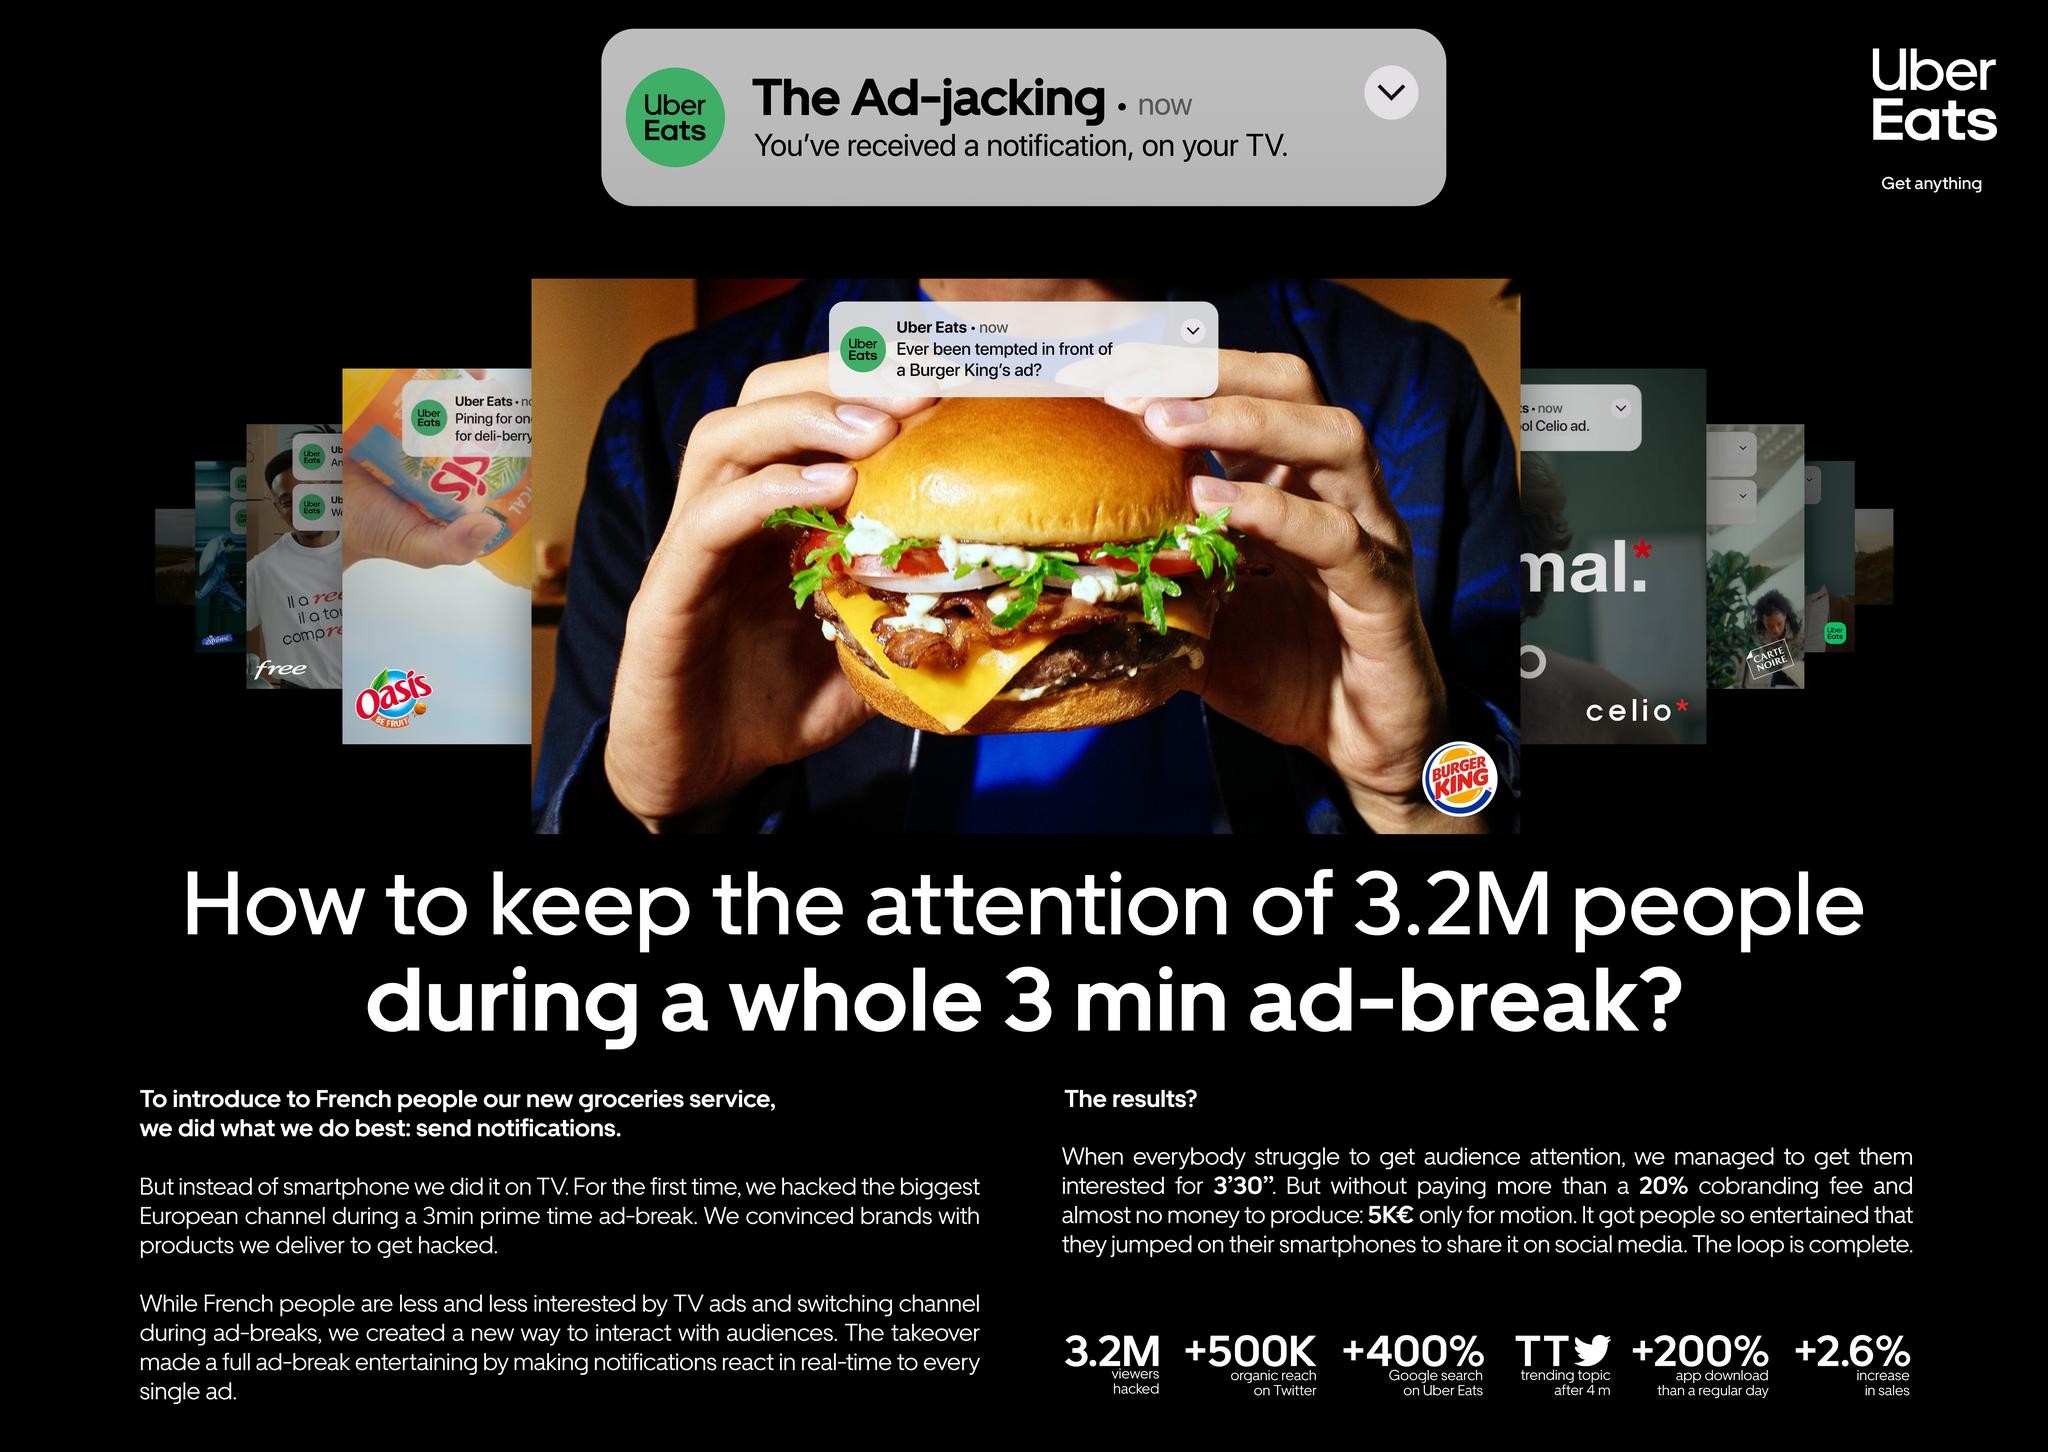 The Ad-jacking